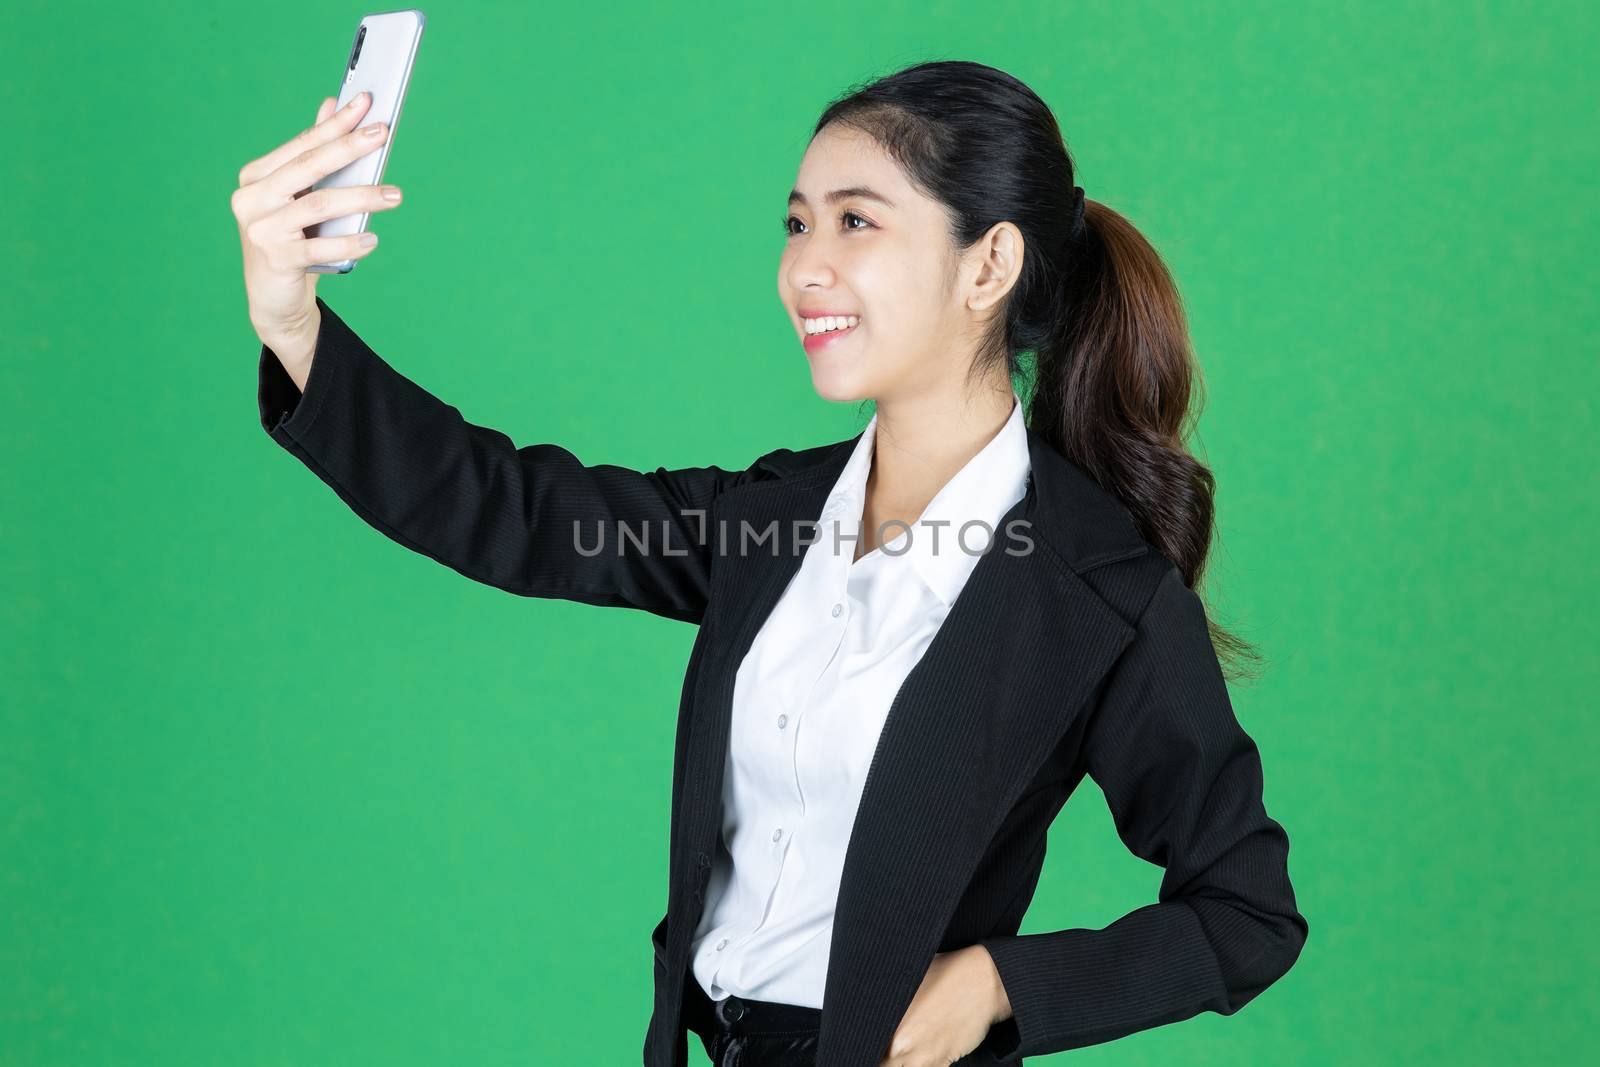 Attractive young Asian business woman taking picture or selfie with mobile smart phone on green isolated background.